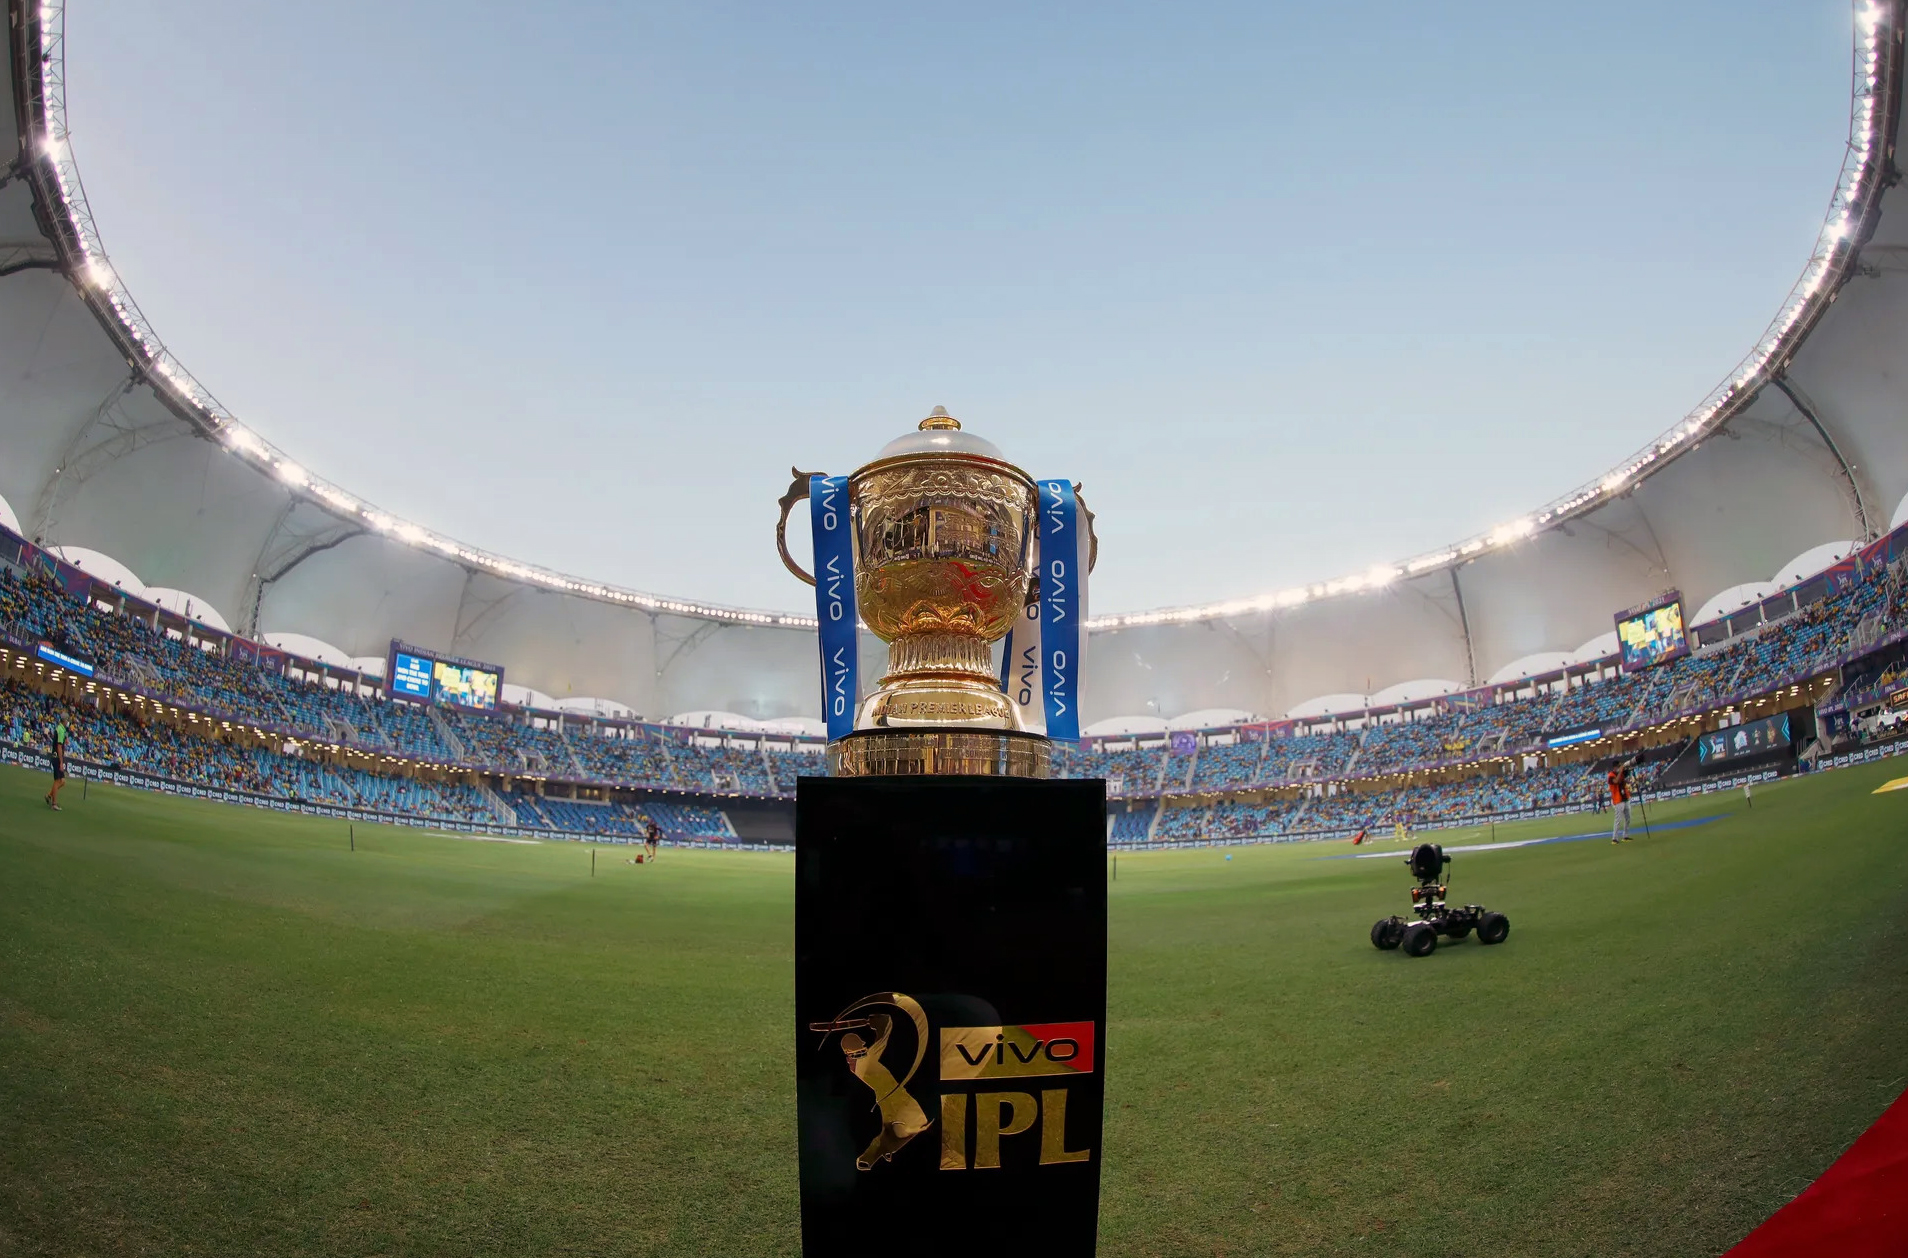 IPL 2021: Chennai team lifts the trophy fourth timeas Dhoni dons the T20 cap 300